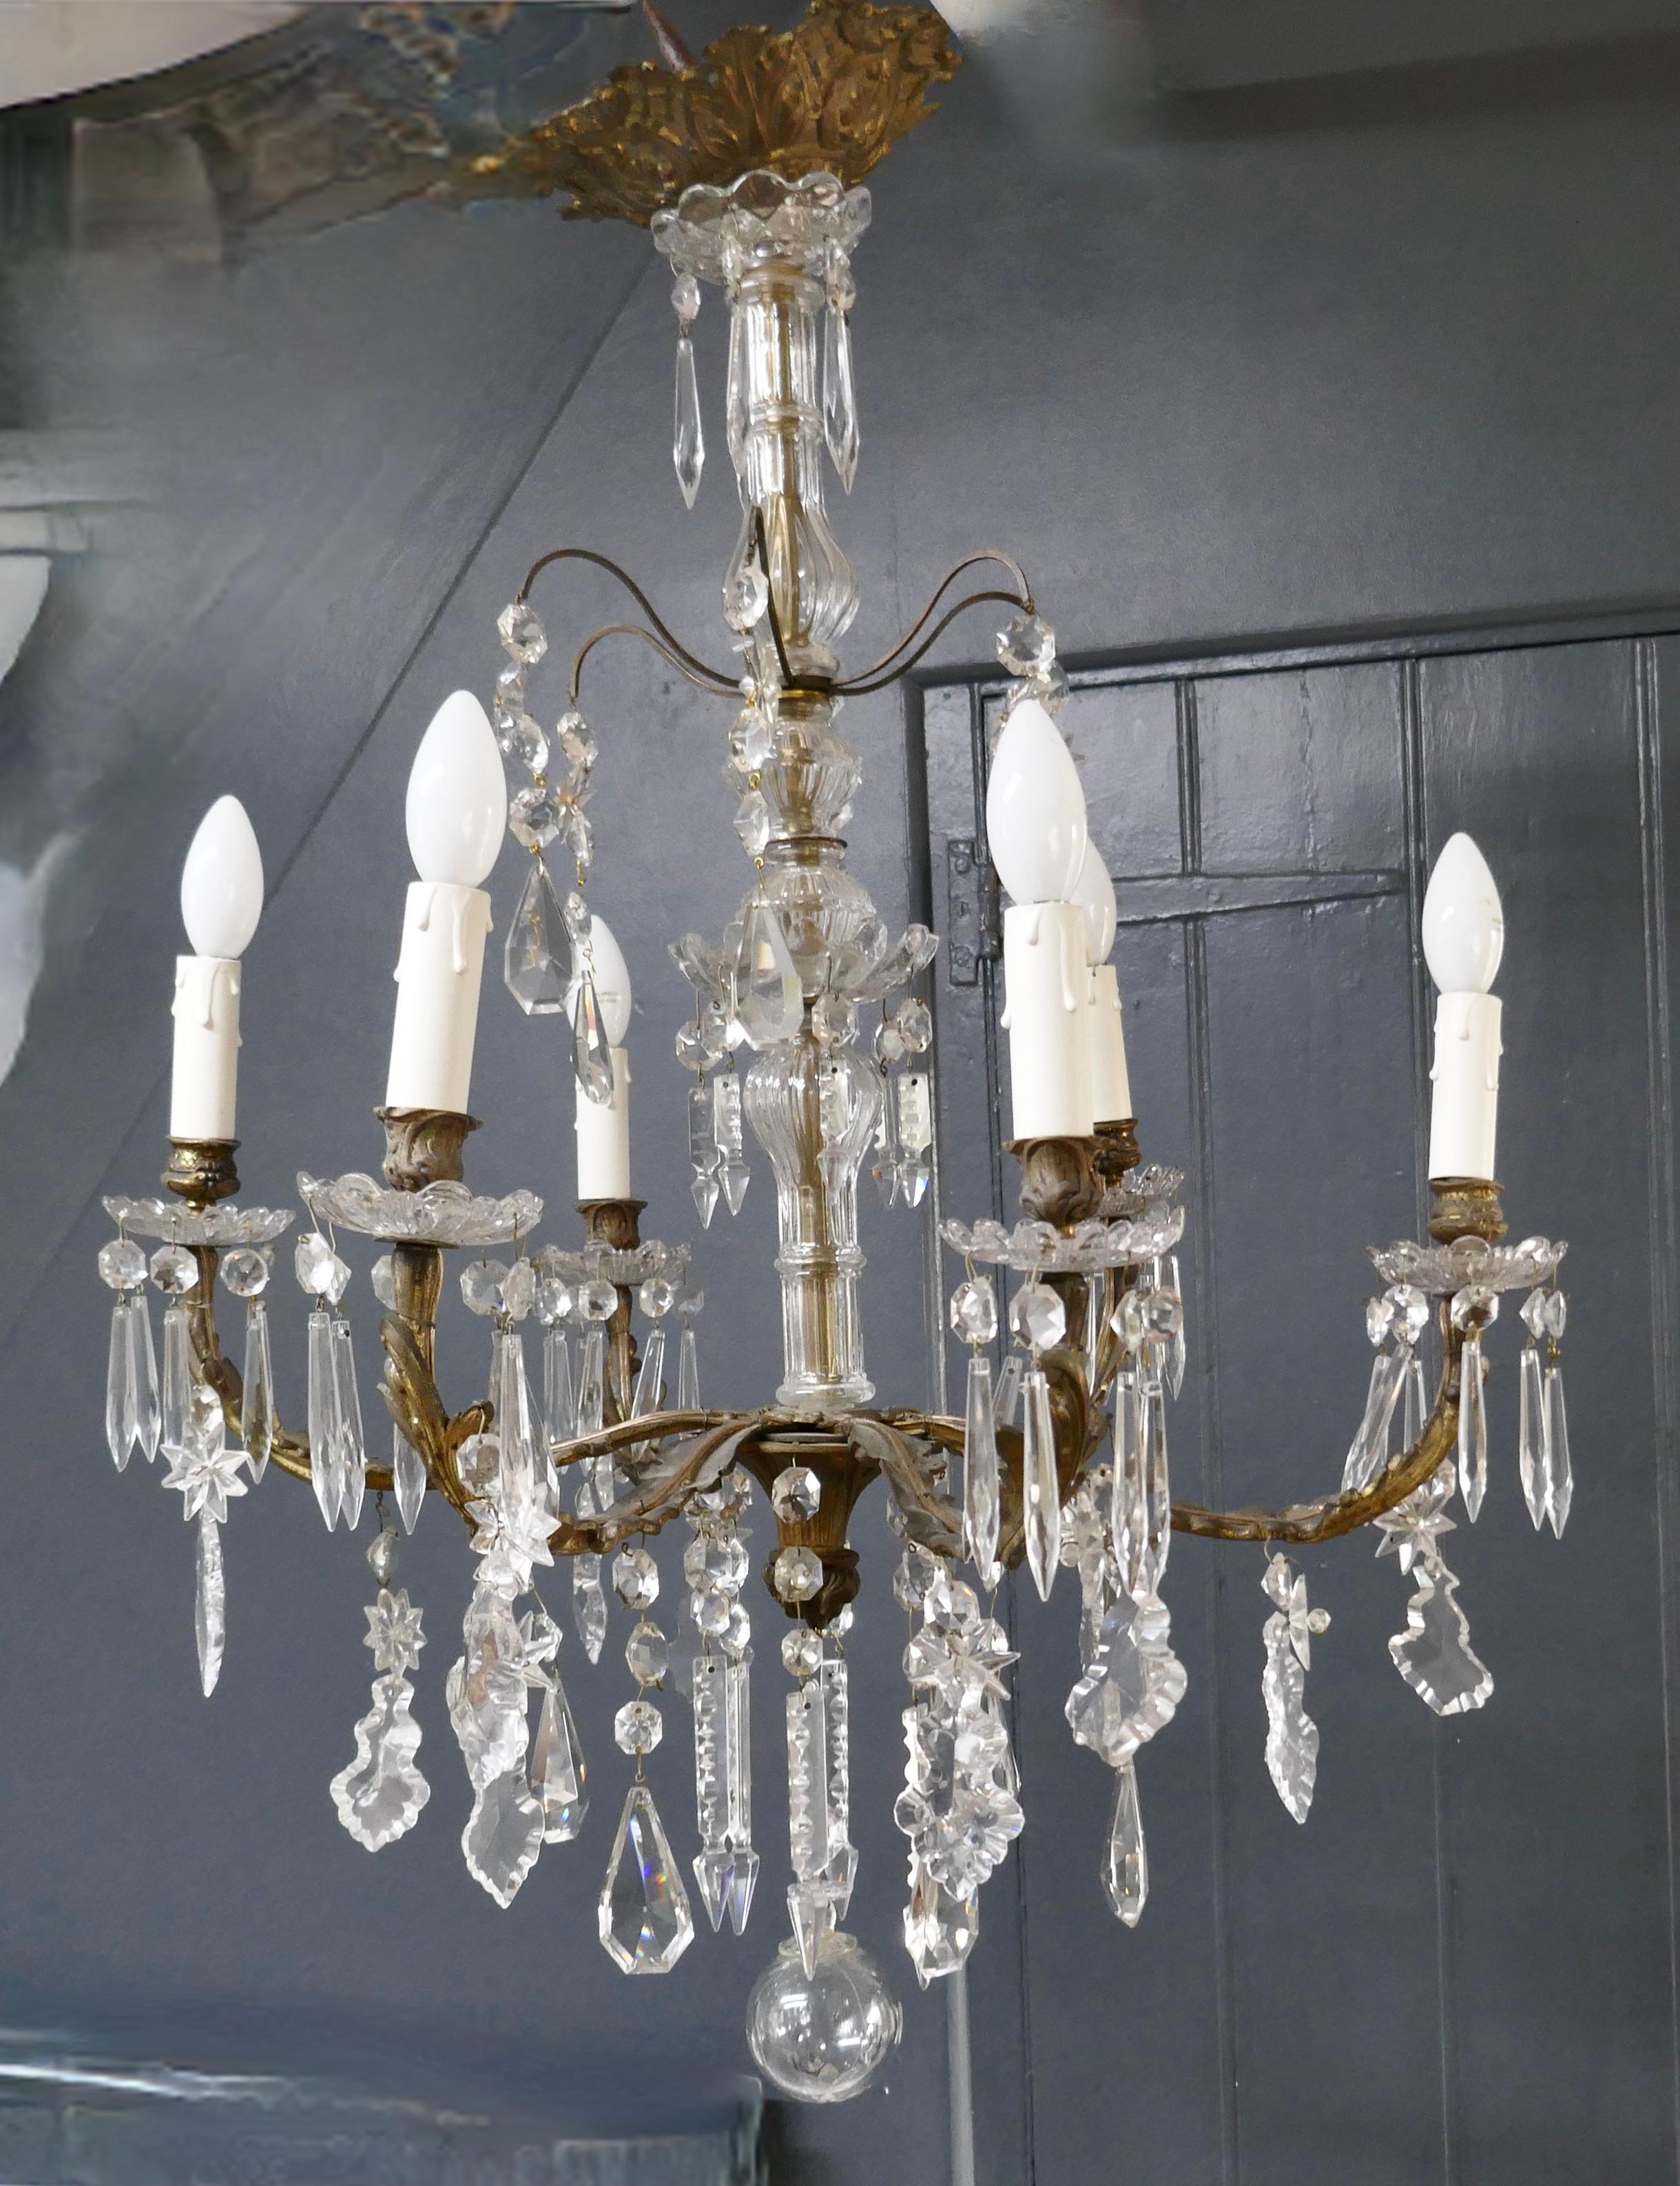 A stunning French cristal 6 branch brass chandelier

This is a superb brass chandelier, the centre baluster is covered with glass and at the end of each branch there are double glass sconces profusely hung with icicles, stars and pear shaped